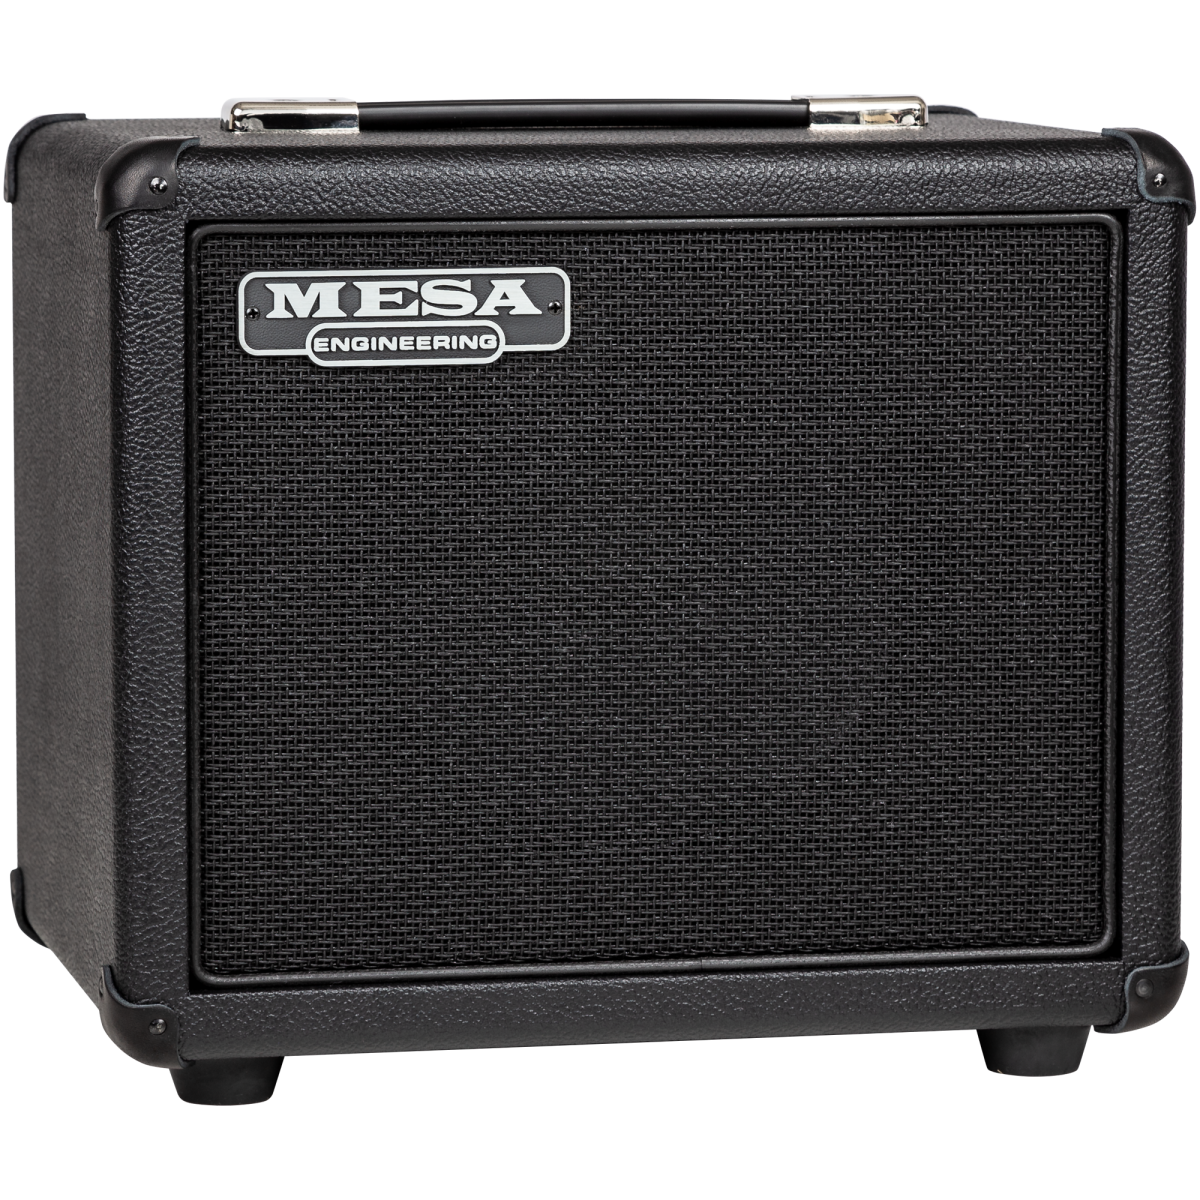 Mesa Boogie 1x10 Rectifier Closed Back Cabinet